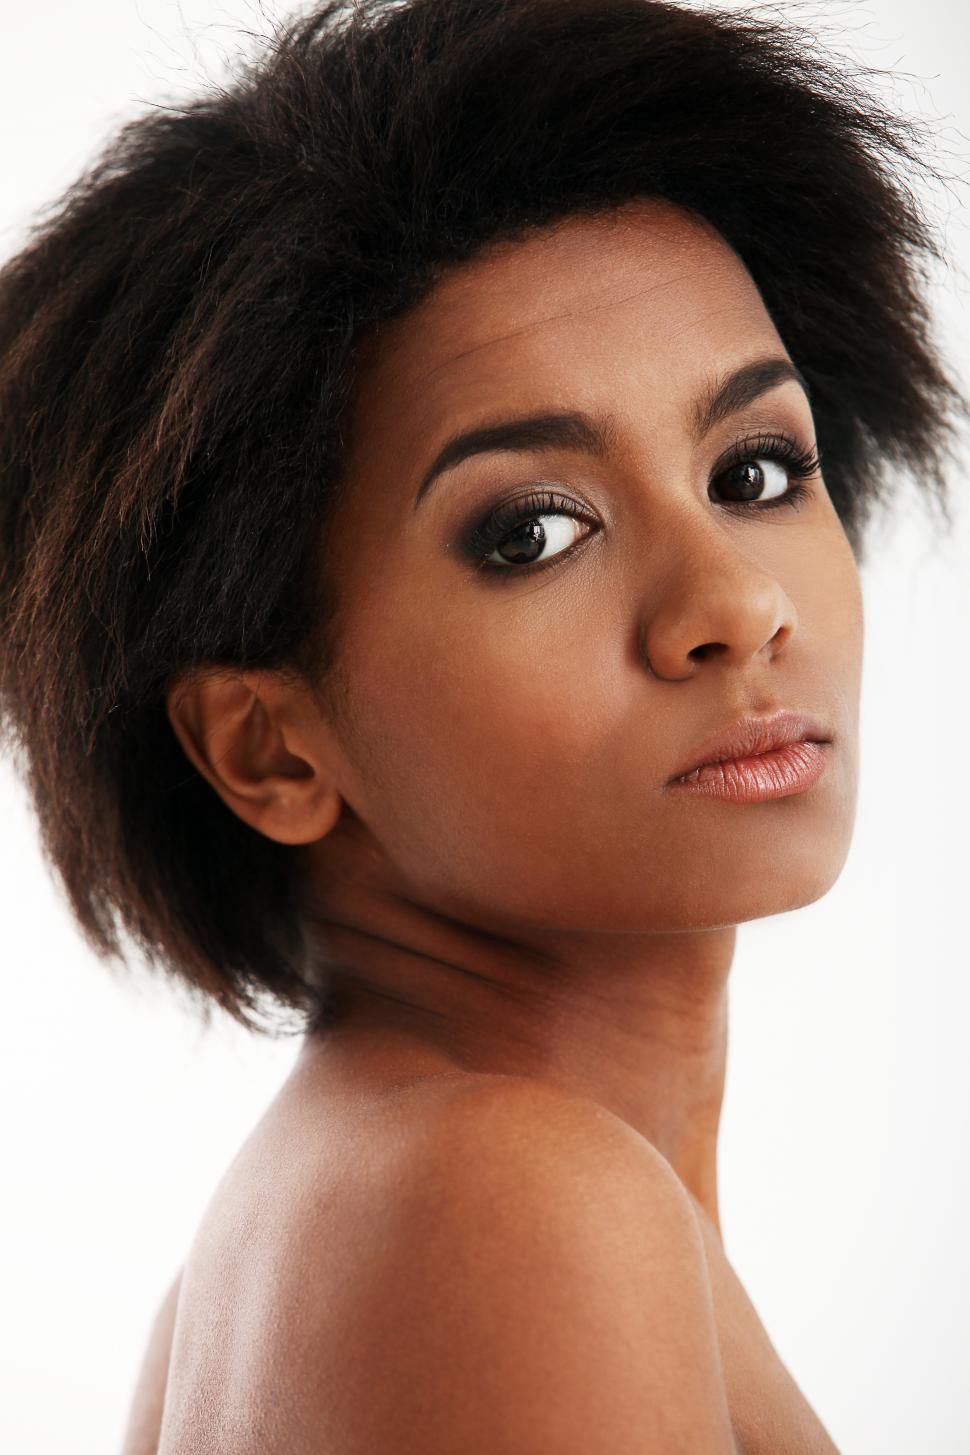 Free Image of Headshot - young Black woman with short hair 